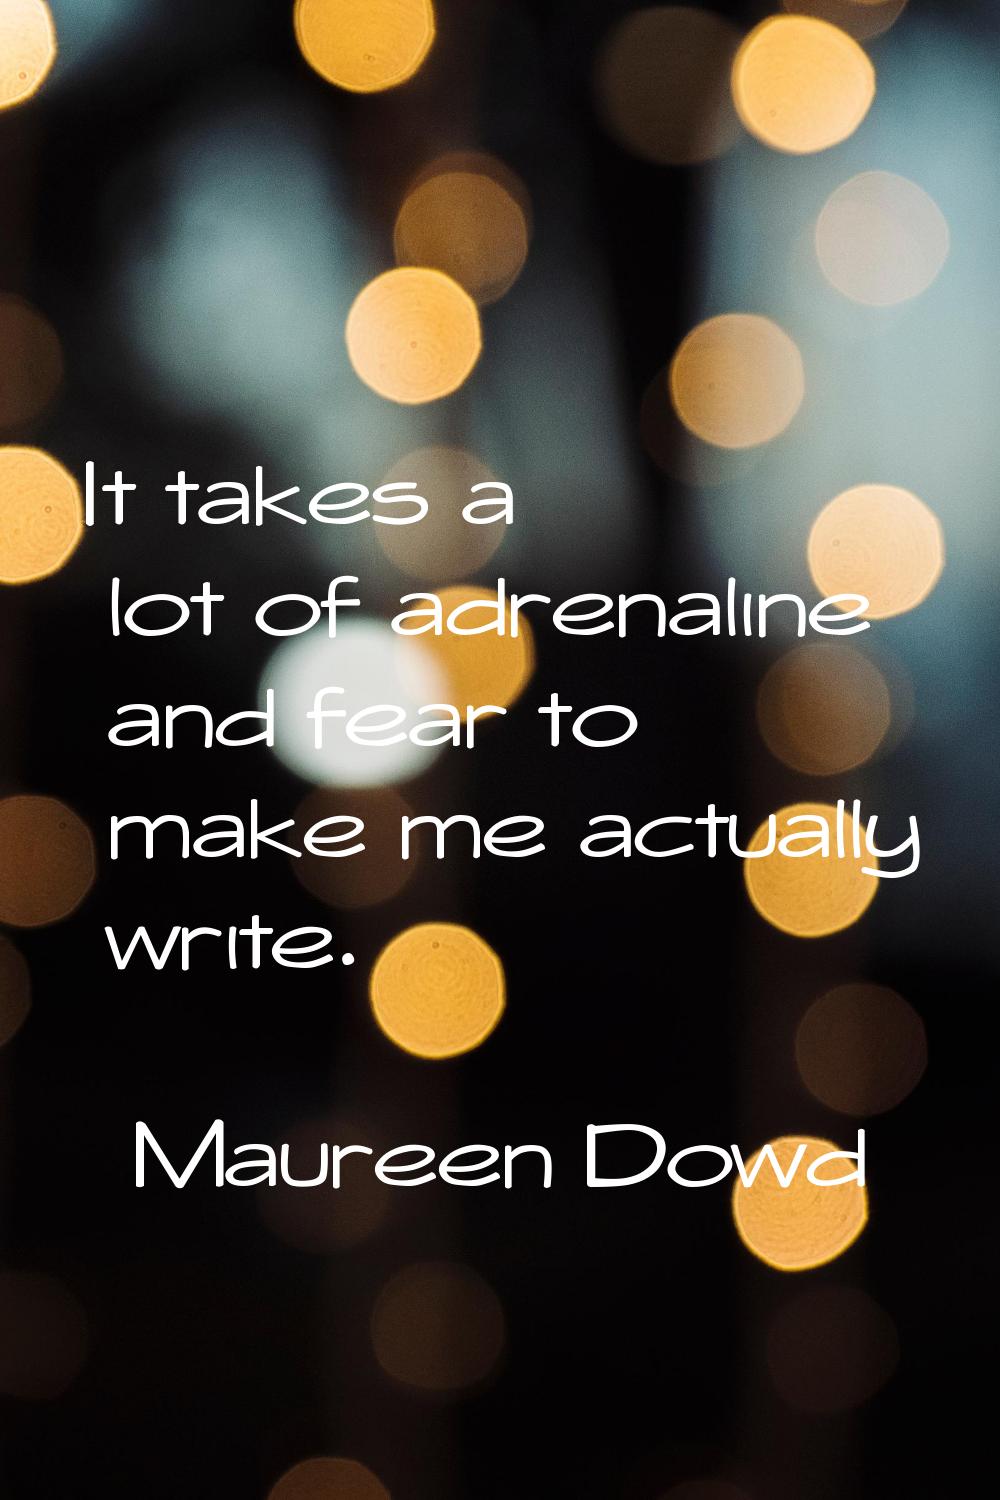 It takes a lot of adrenaline and fear to make me actually write.